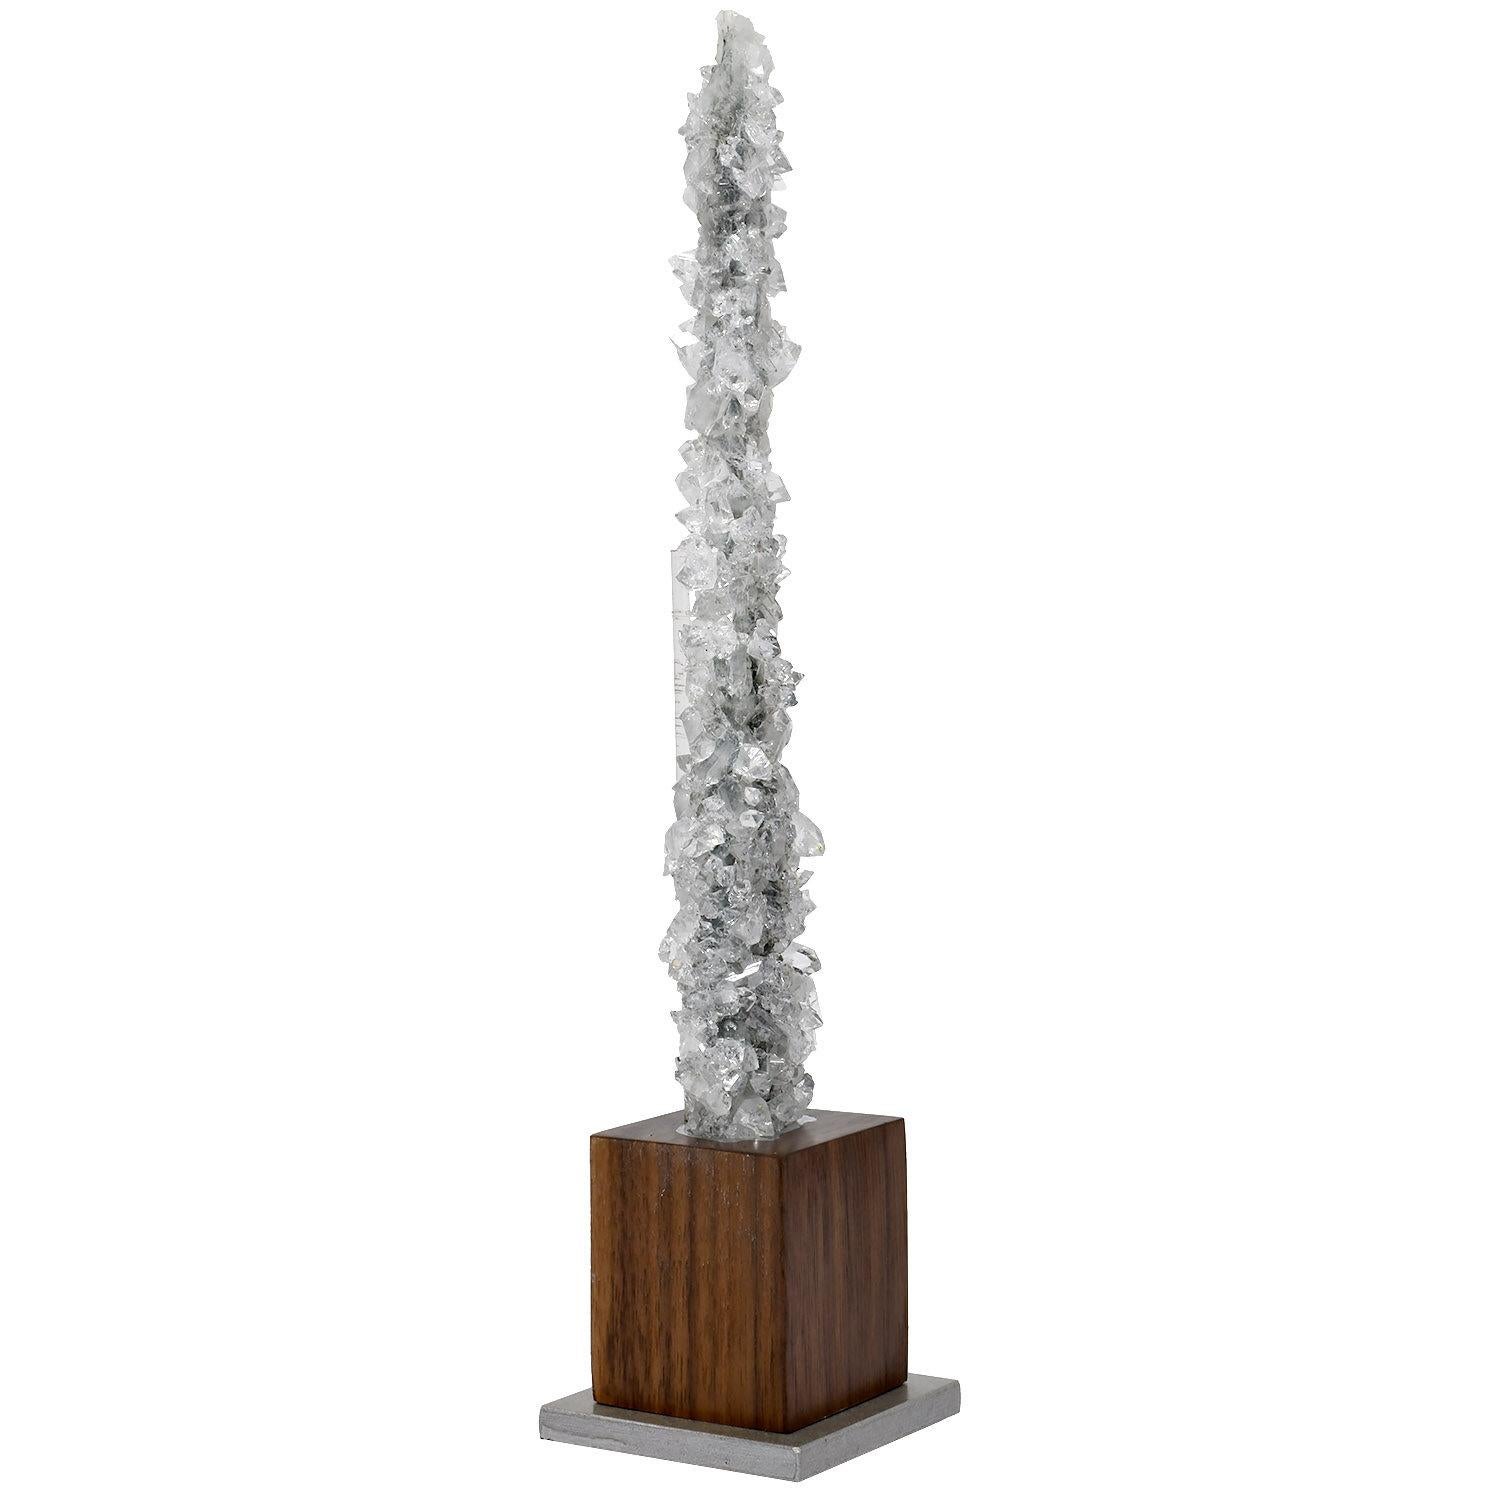 Naturally-formed mineral scepter: Clear Apophyllite from India

Height on custom display stand: 10.25 in. / 26 cm

Custom mounted on a nickel painted steel and walnut base with Lucite mounting rod.